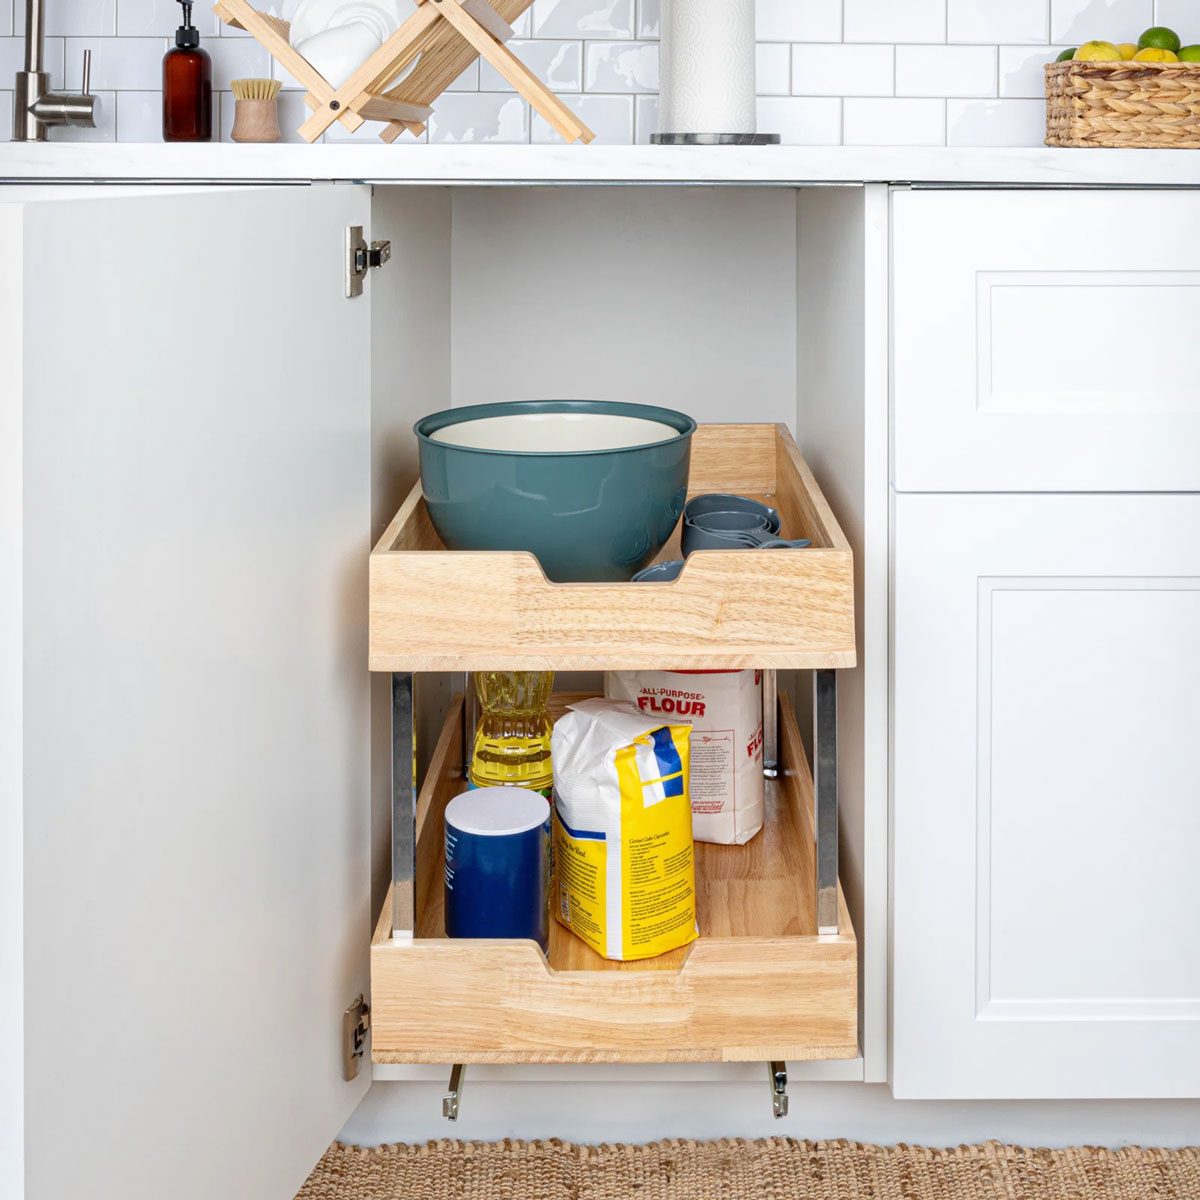 Luxury storage ideas for small kitchens - WG Wood Products